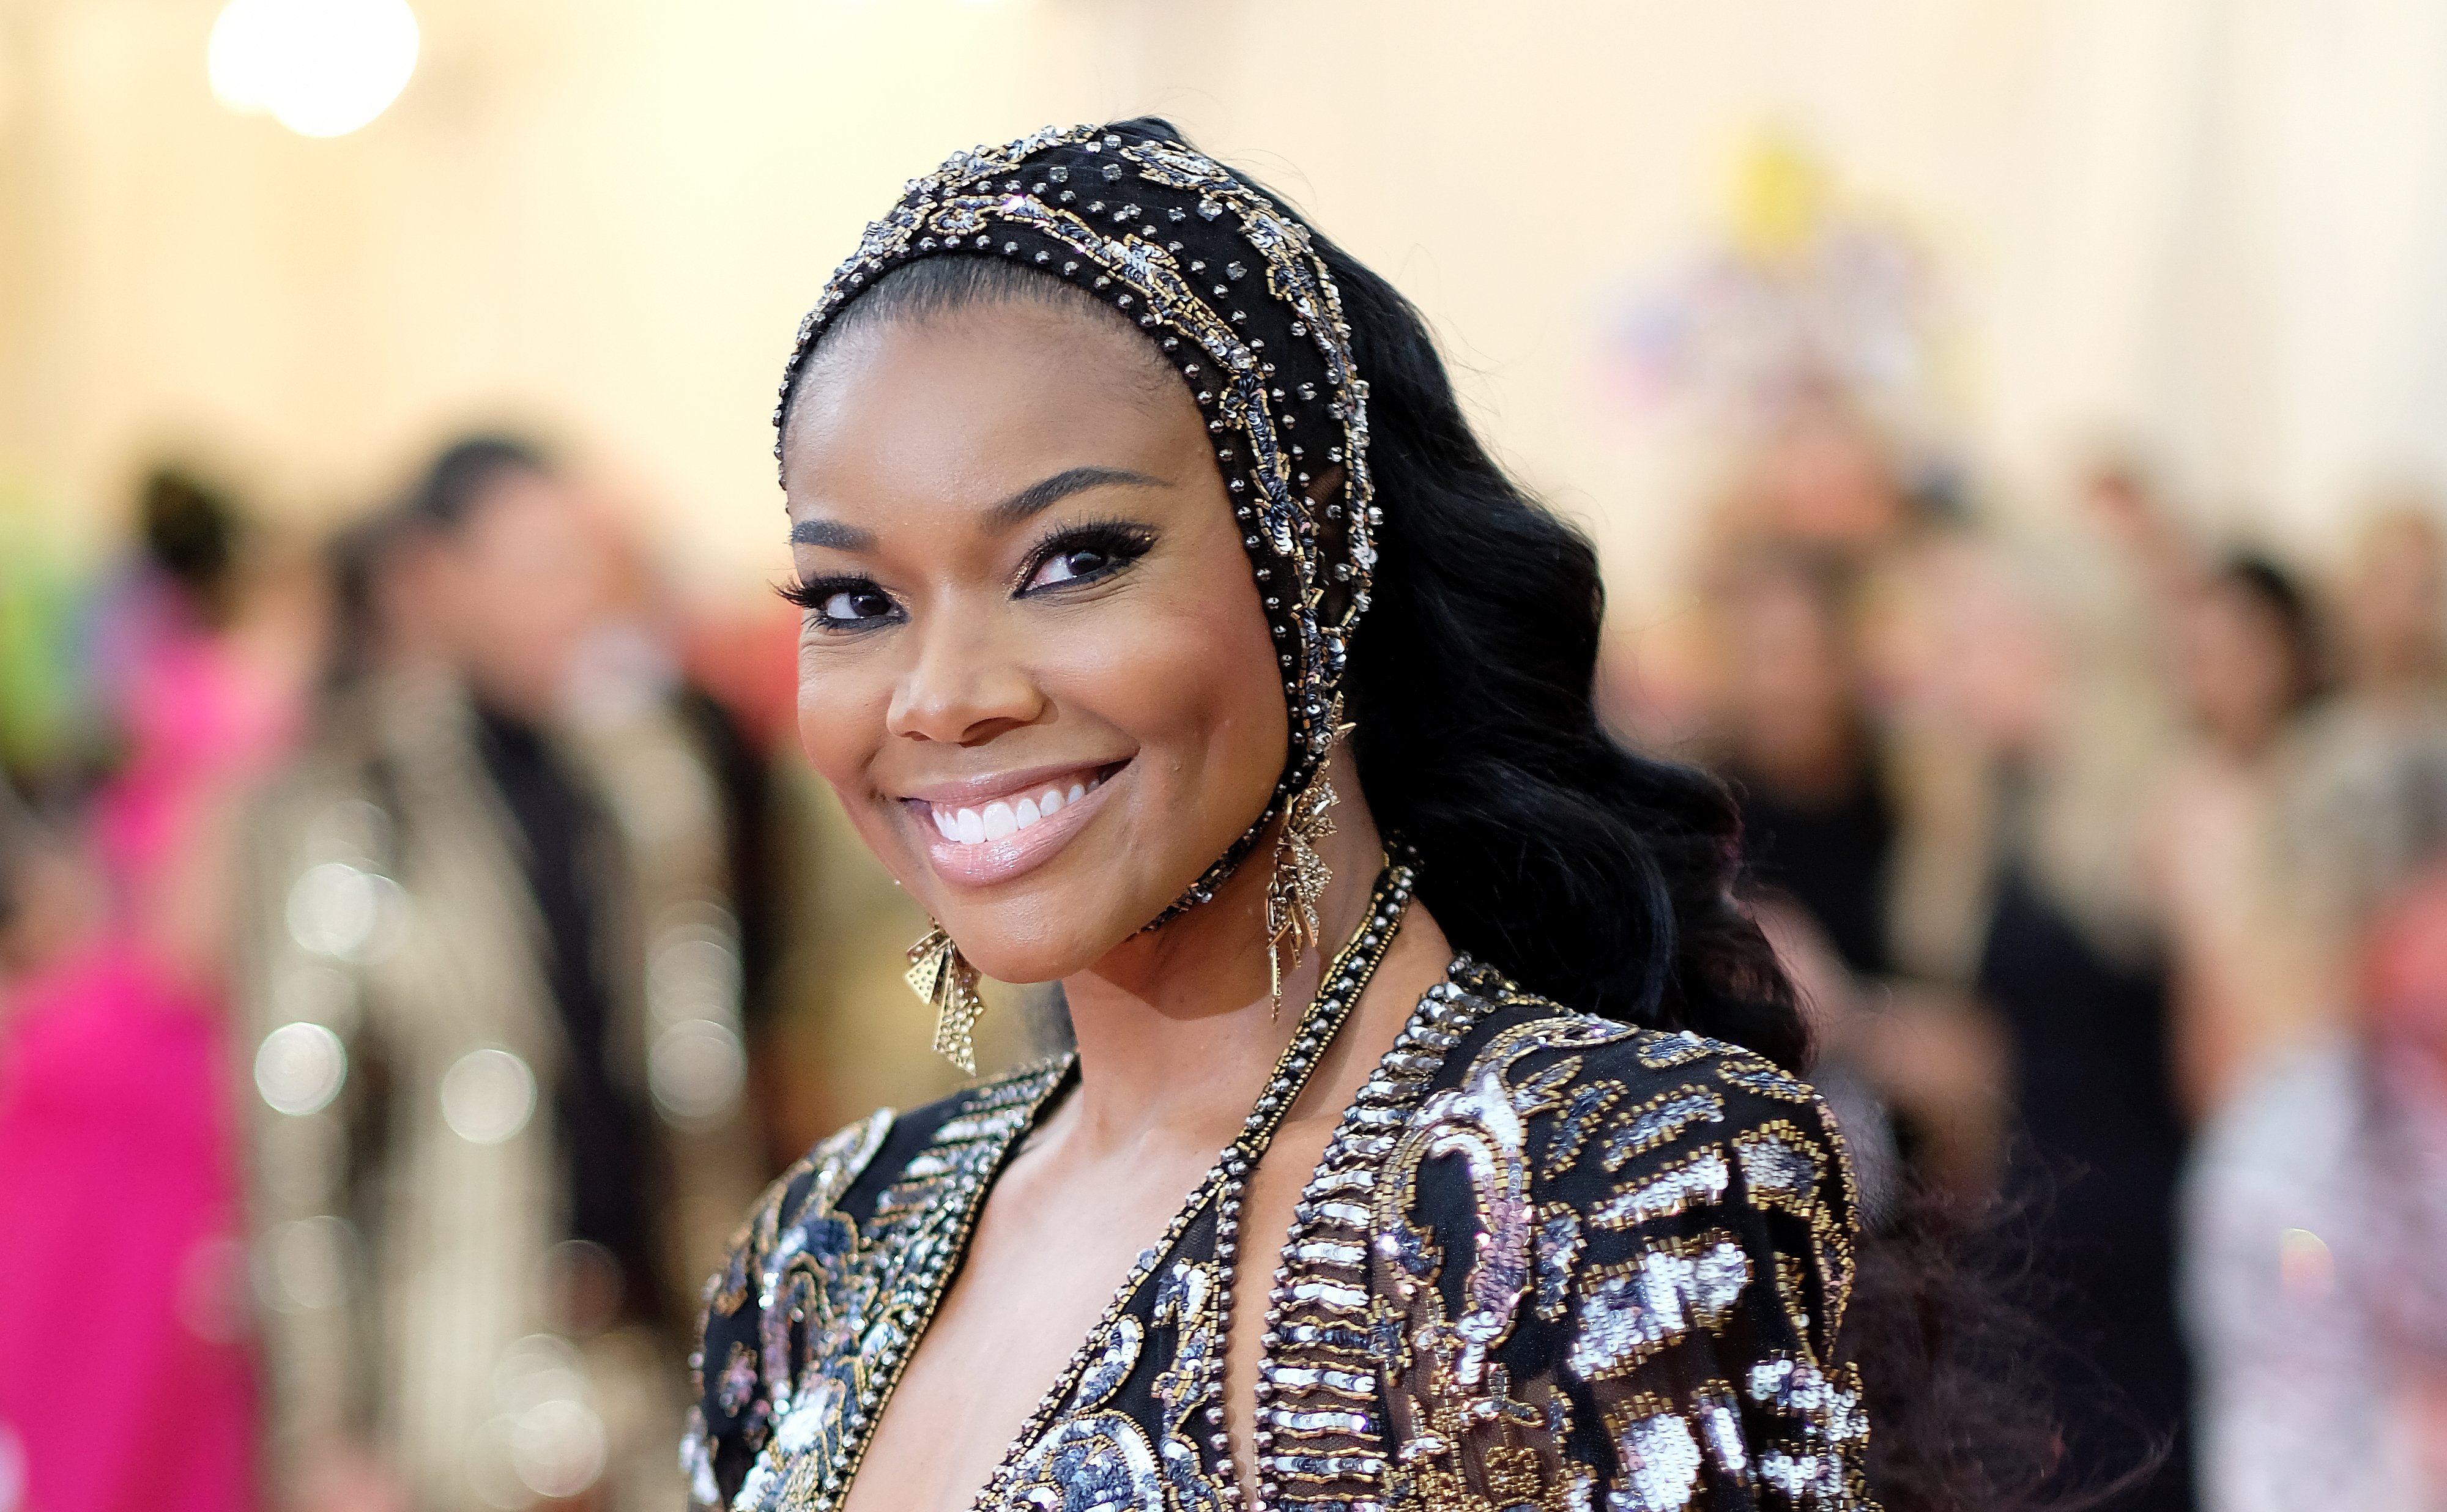 Gabrielle Union at the 2019 Met Gala in May. | Photo: Getty Images